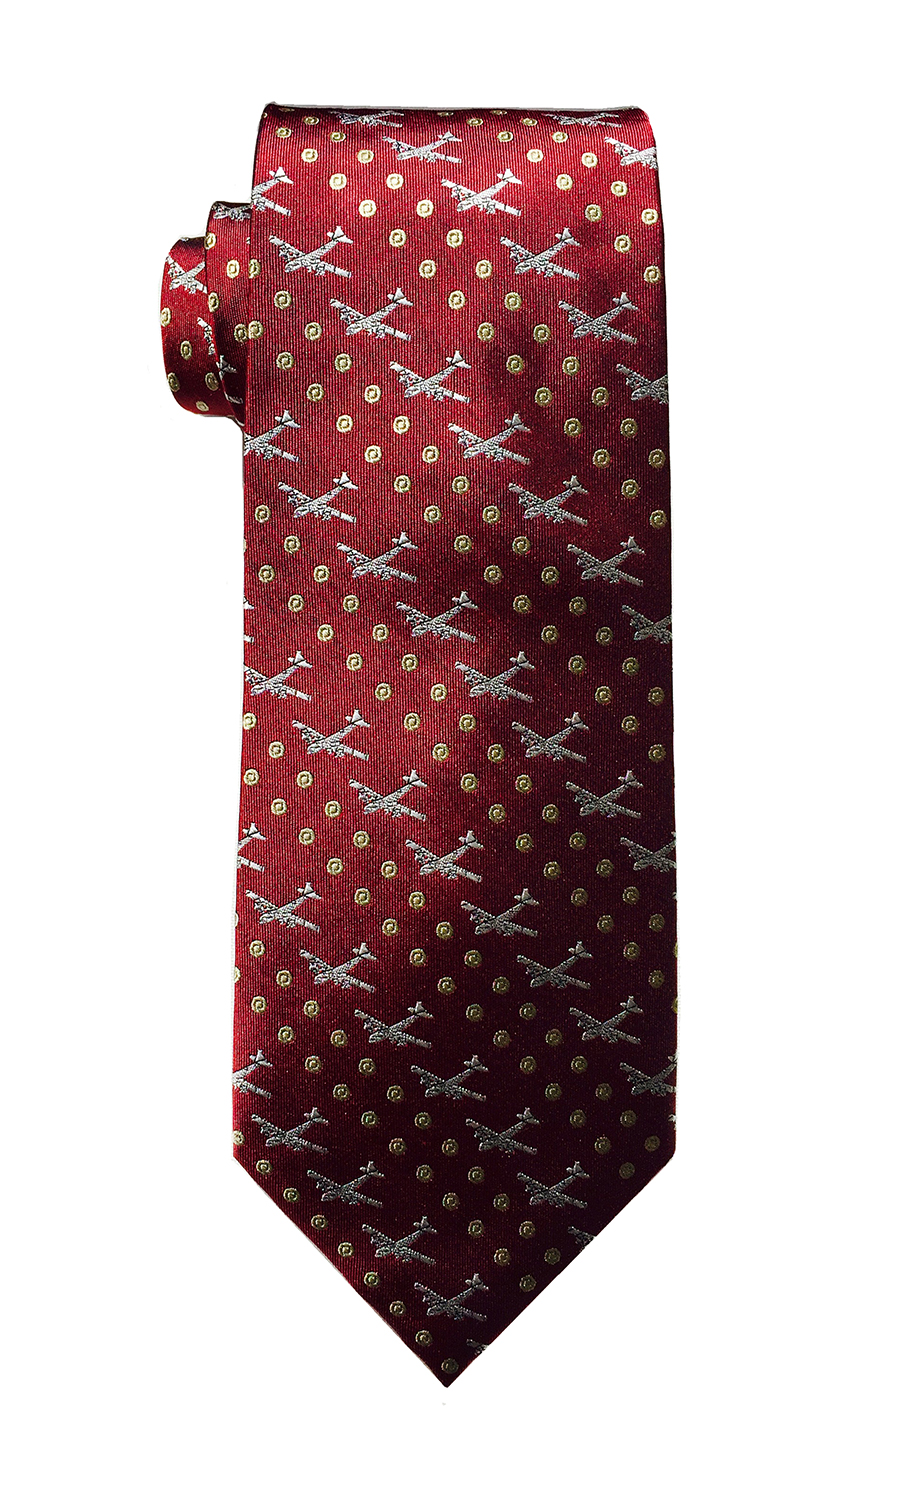 B-29 Superfortress airplane tie in red